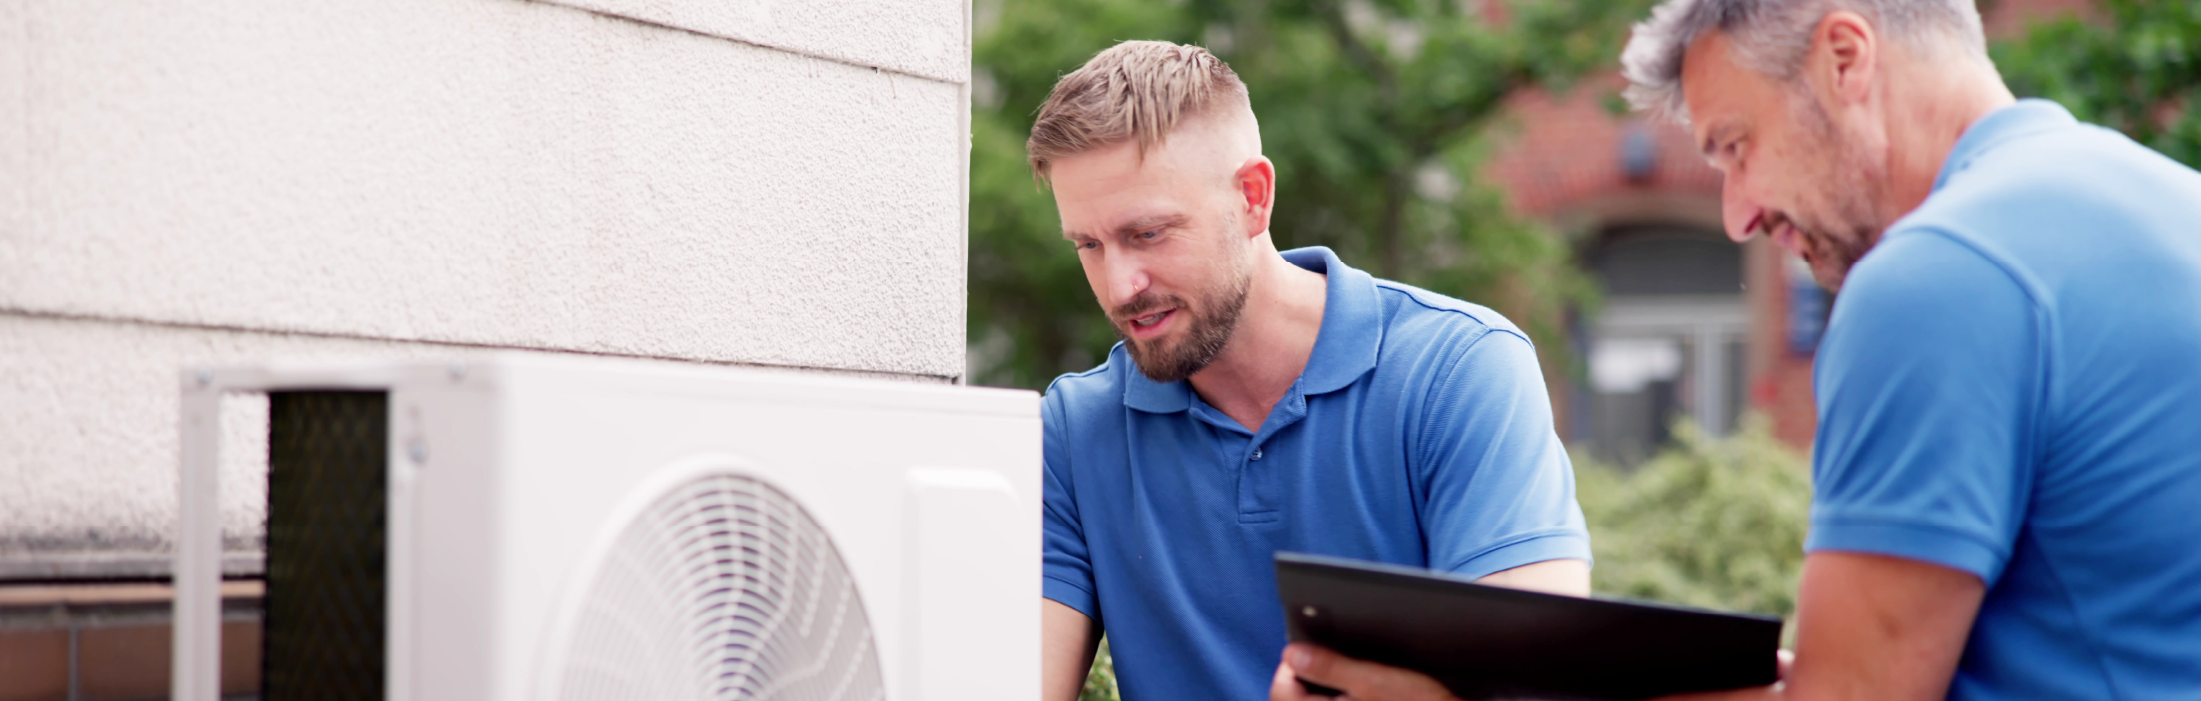 two male HVAC technicians working on an outdoor HVAC unit